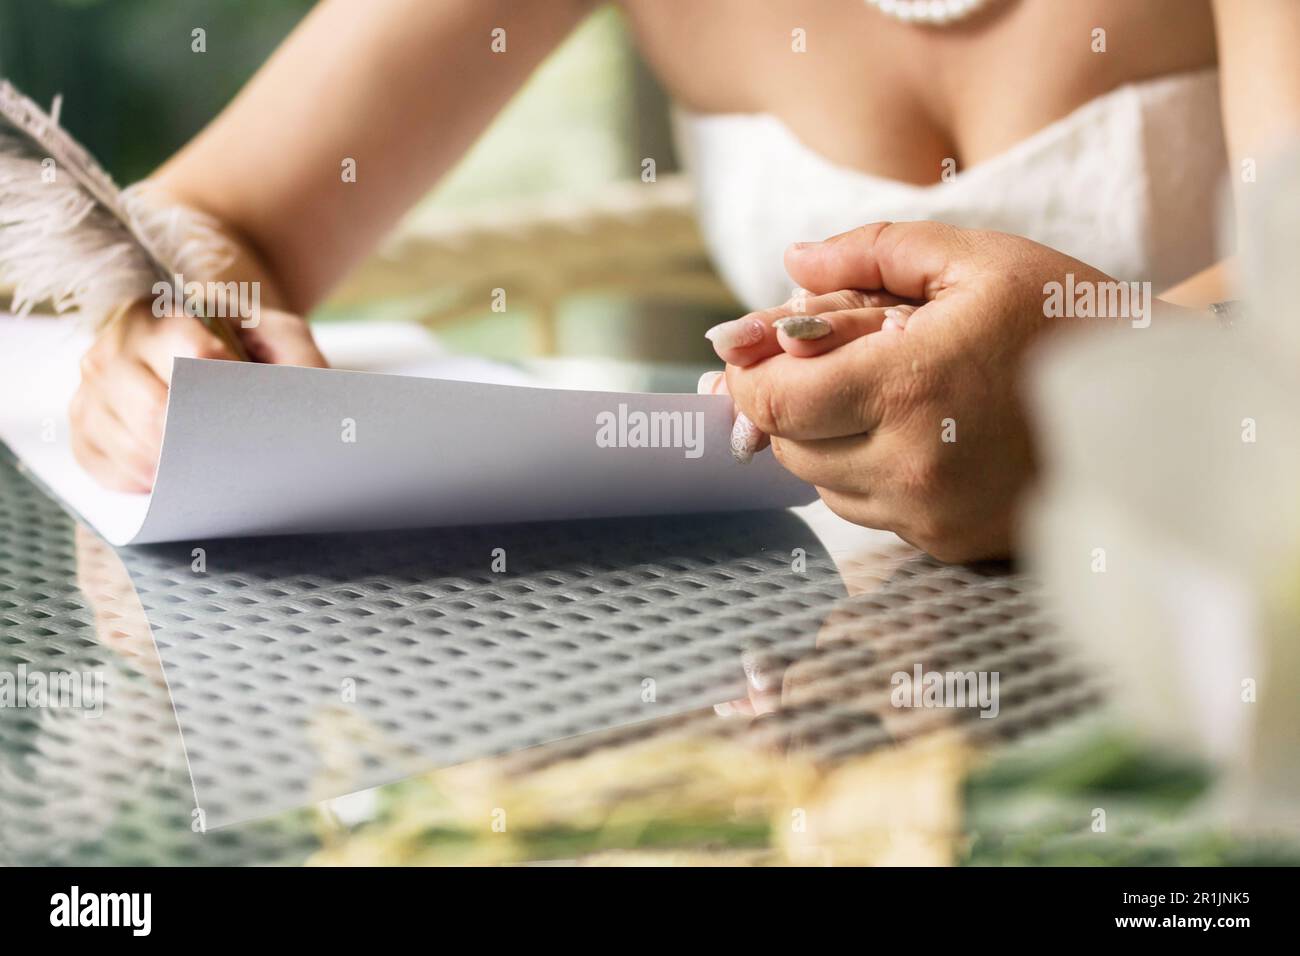 The bride and groom sign a marriage contract. The man holds the woman's hand. Toned image. Stock Photo